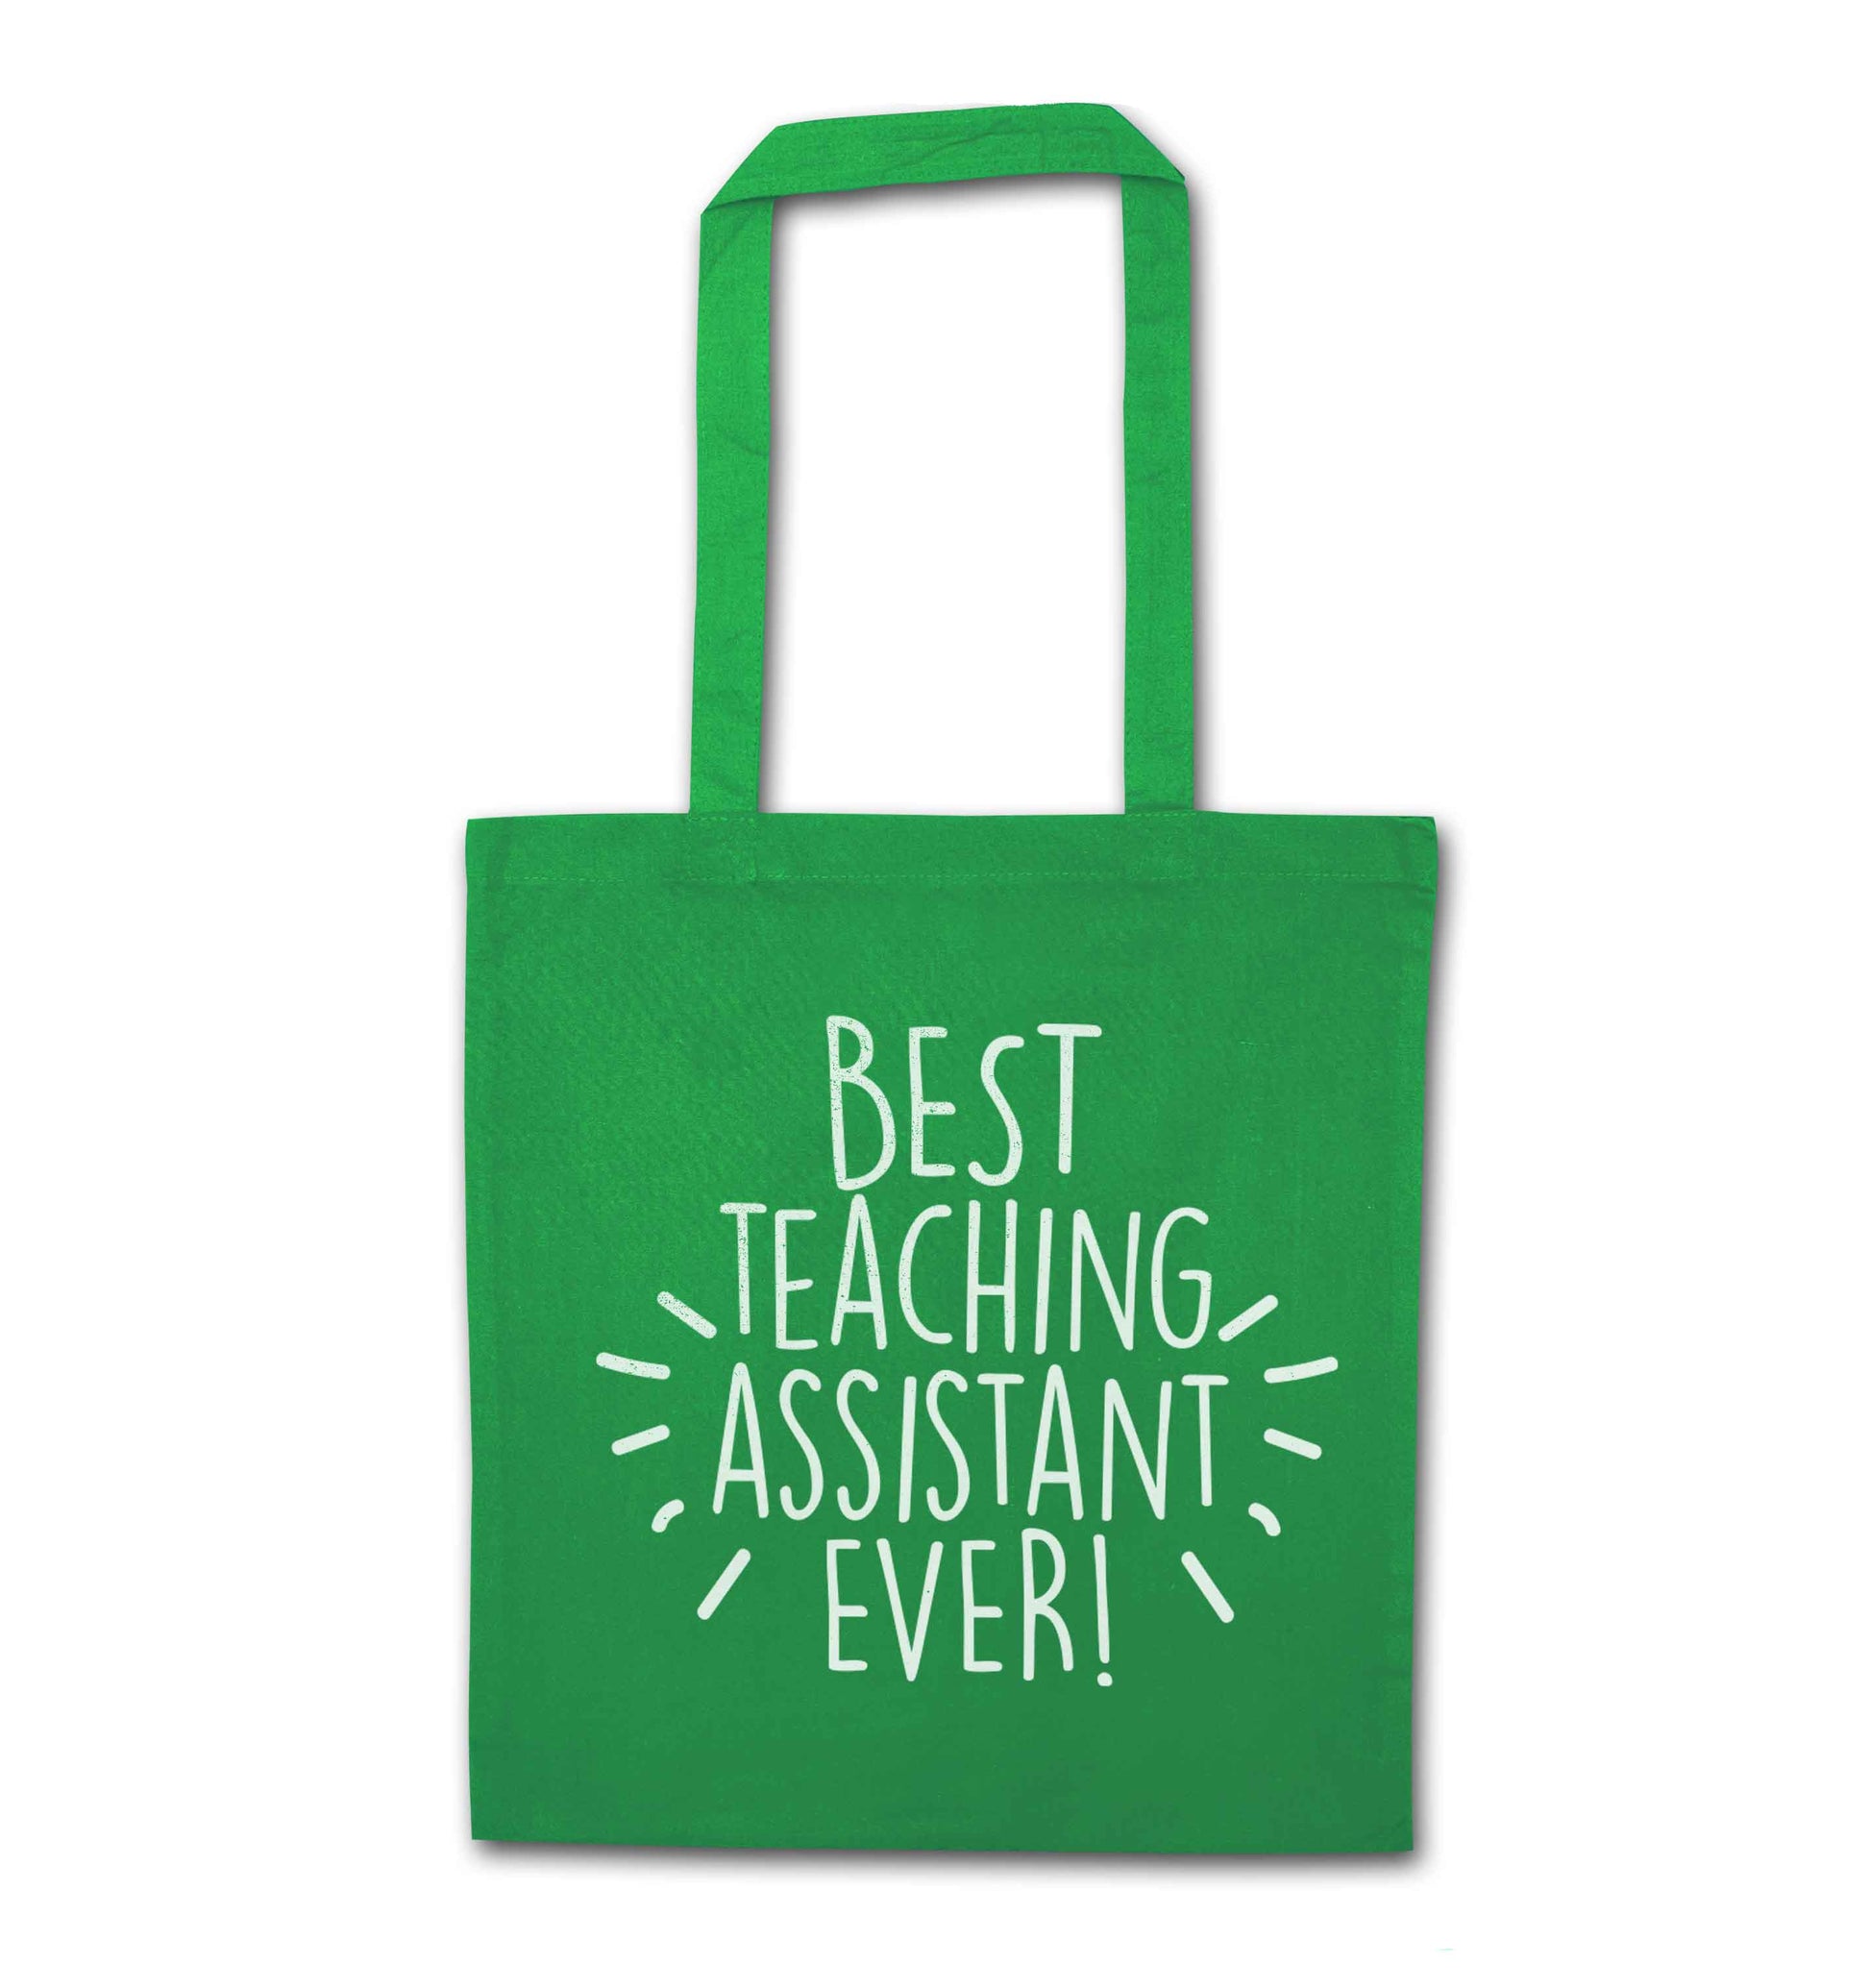 Best teaching assistant ever! green tote bag